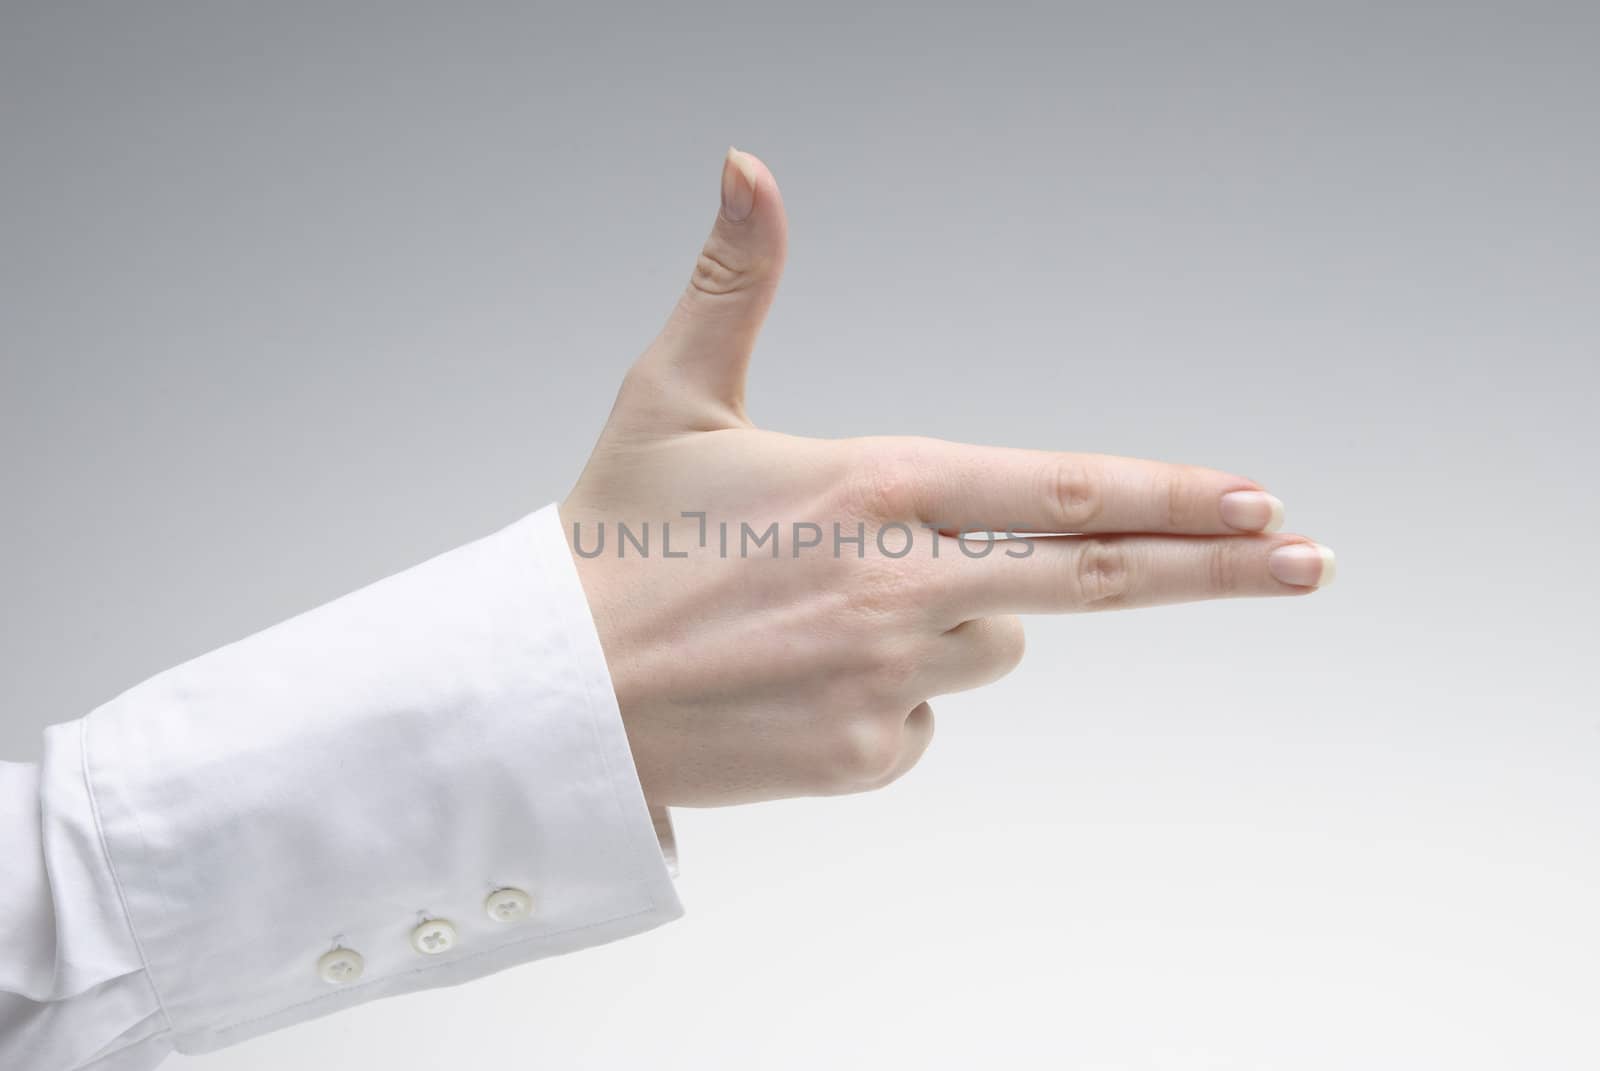 Woman's hand showing pistol symbol  over light background